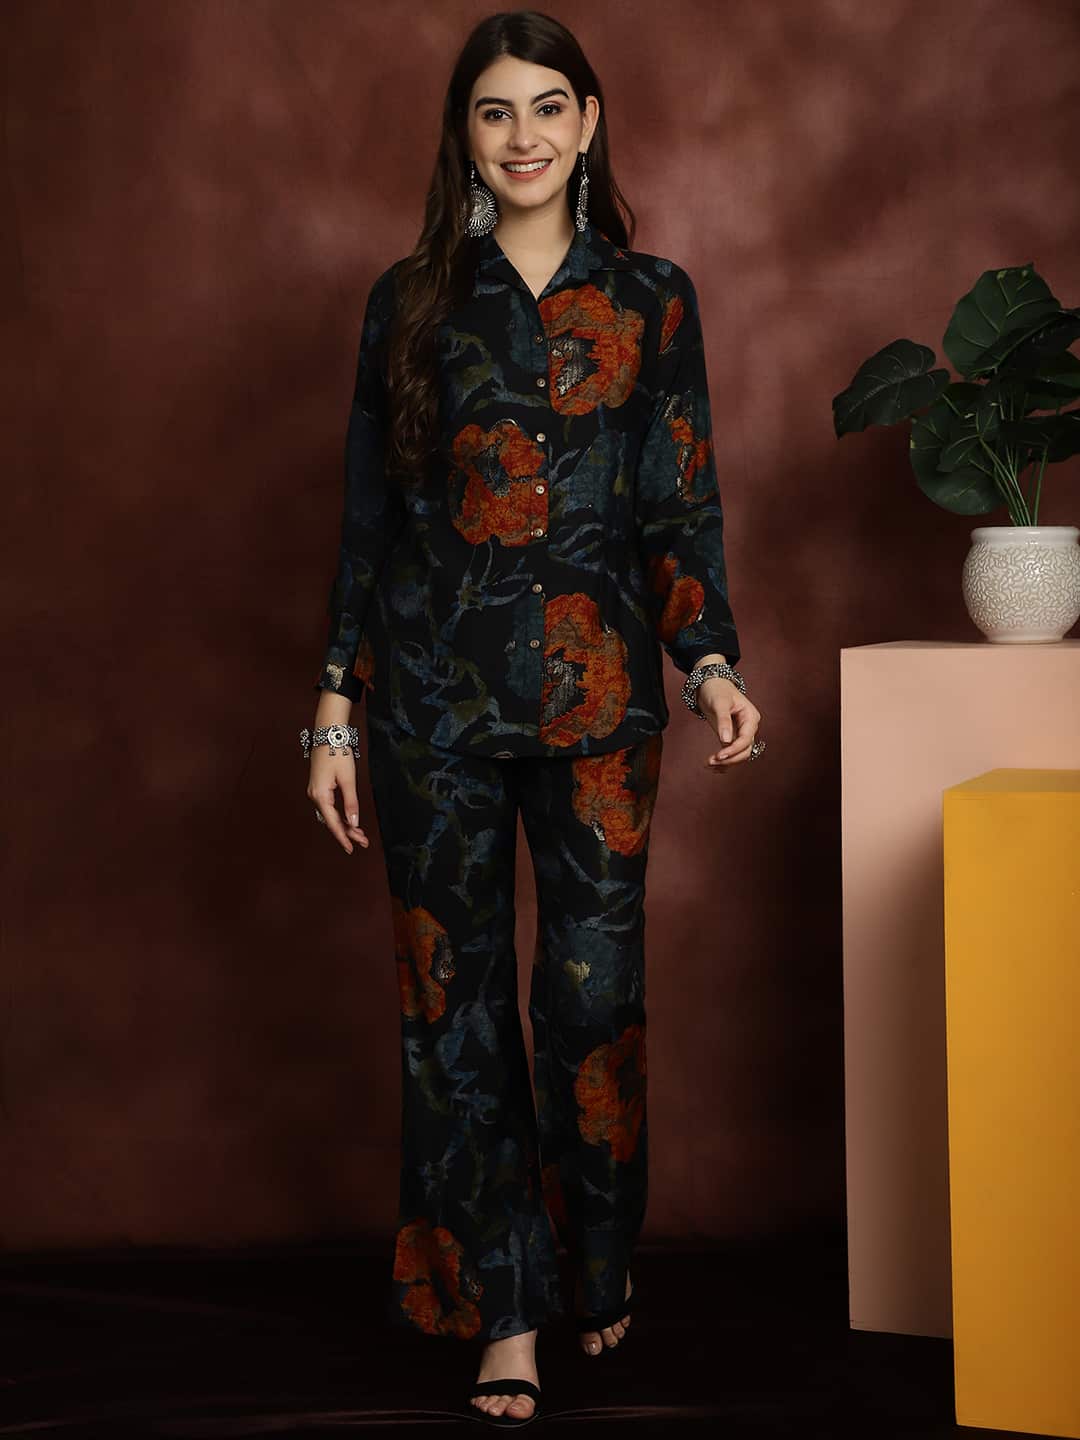 Navy Blue Motif Printed Chanderi Silk Shirt With Trousers Co-ord Set Claura Designs Pvt. Ltd. Cord set Abstract, Chanderi Silk, Co-ord, Co-ord Set, Ethnic, Floral, Navy Blue, Printed